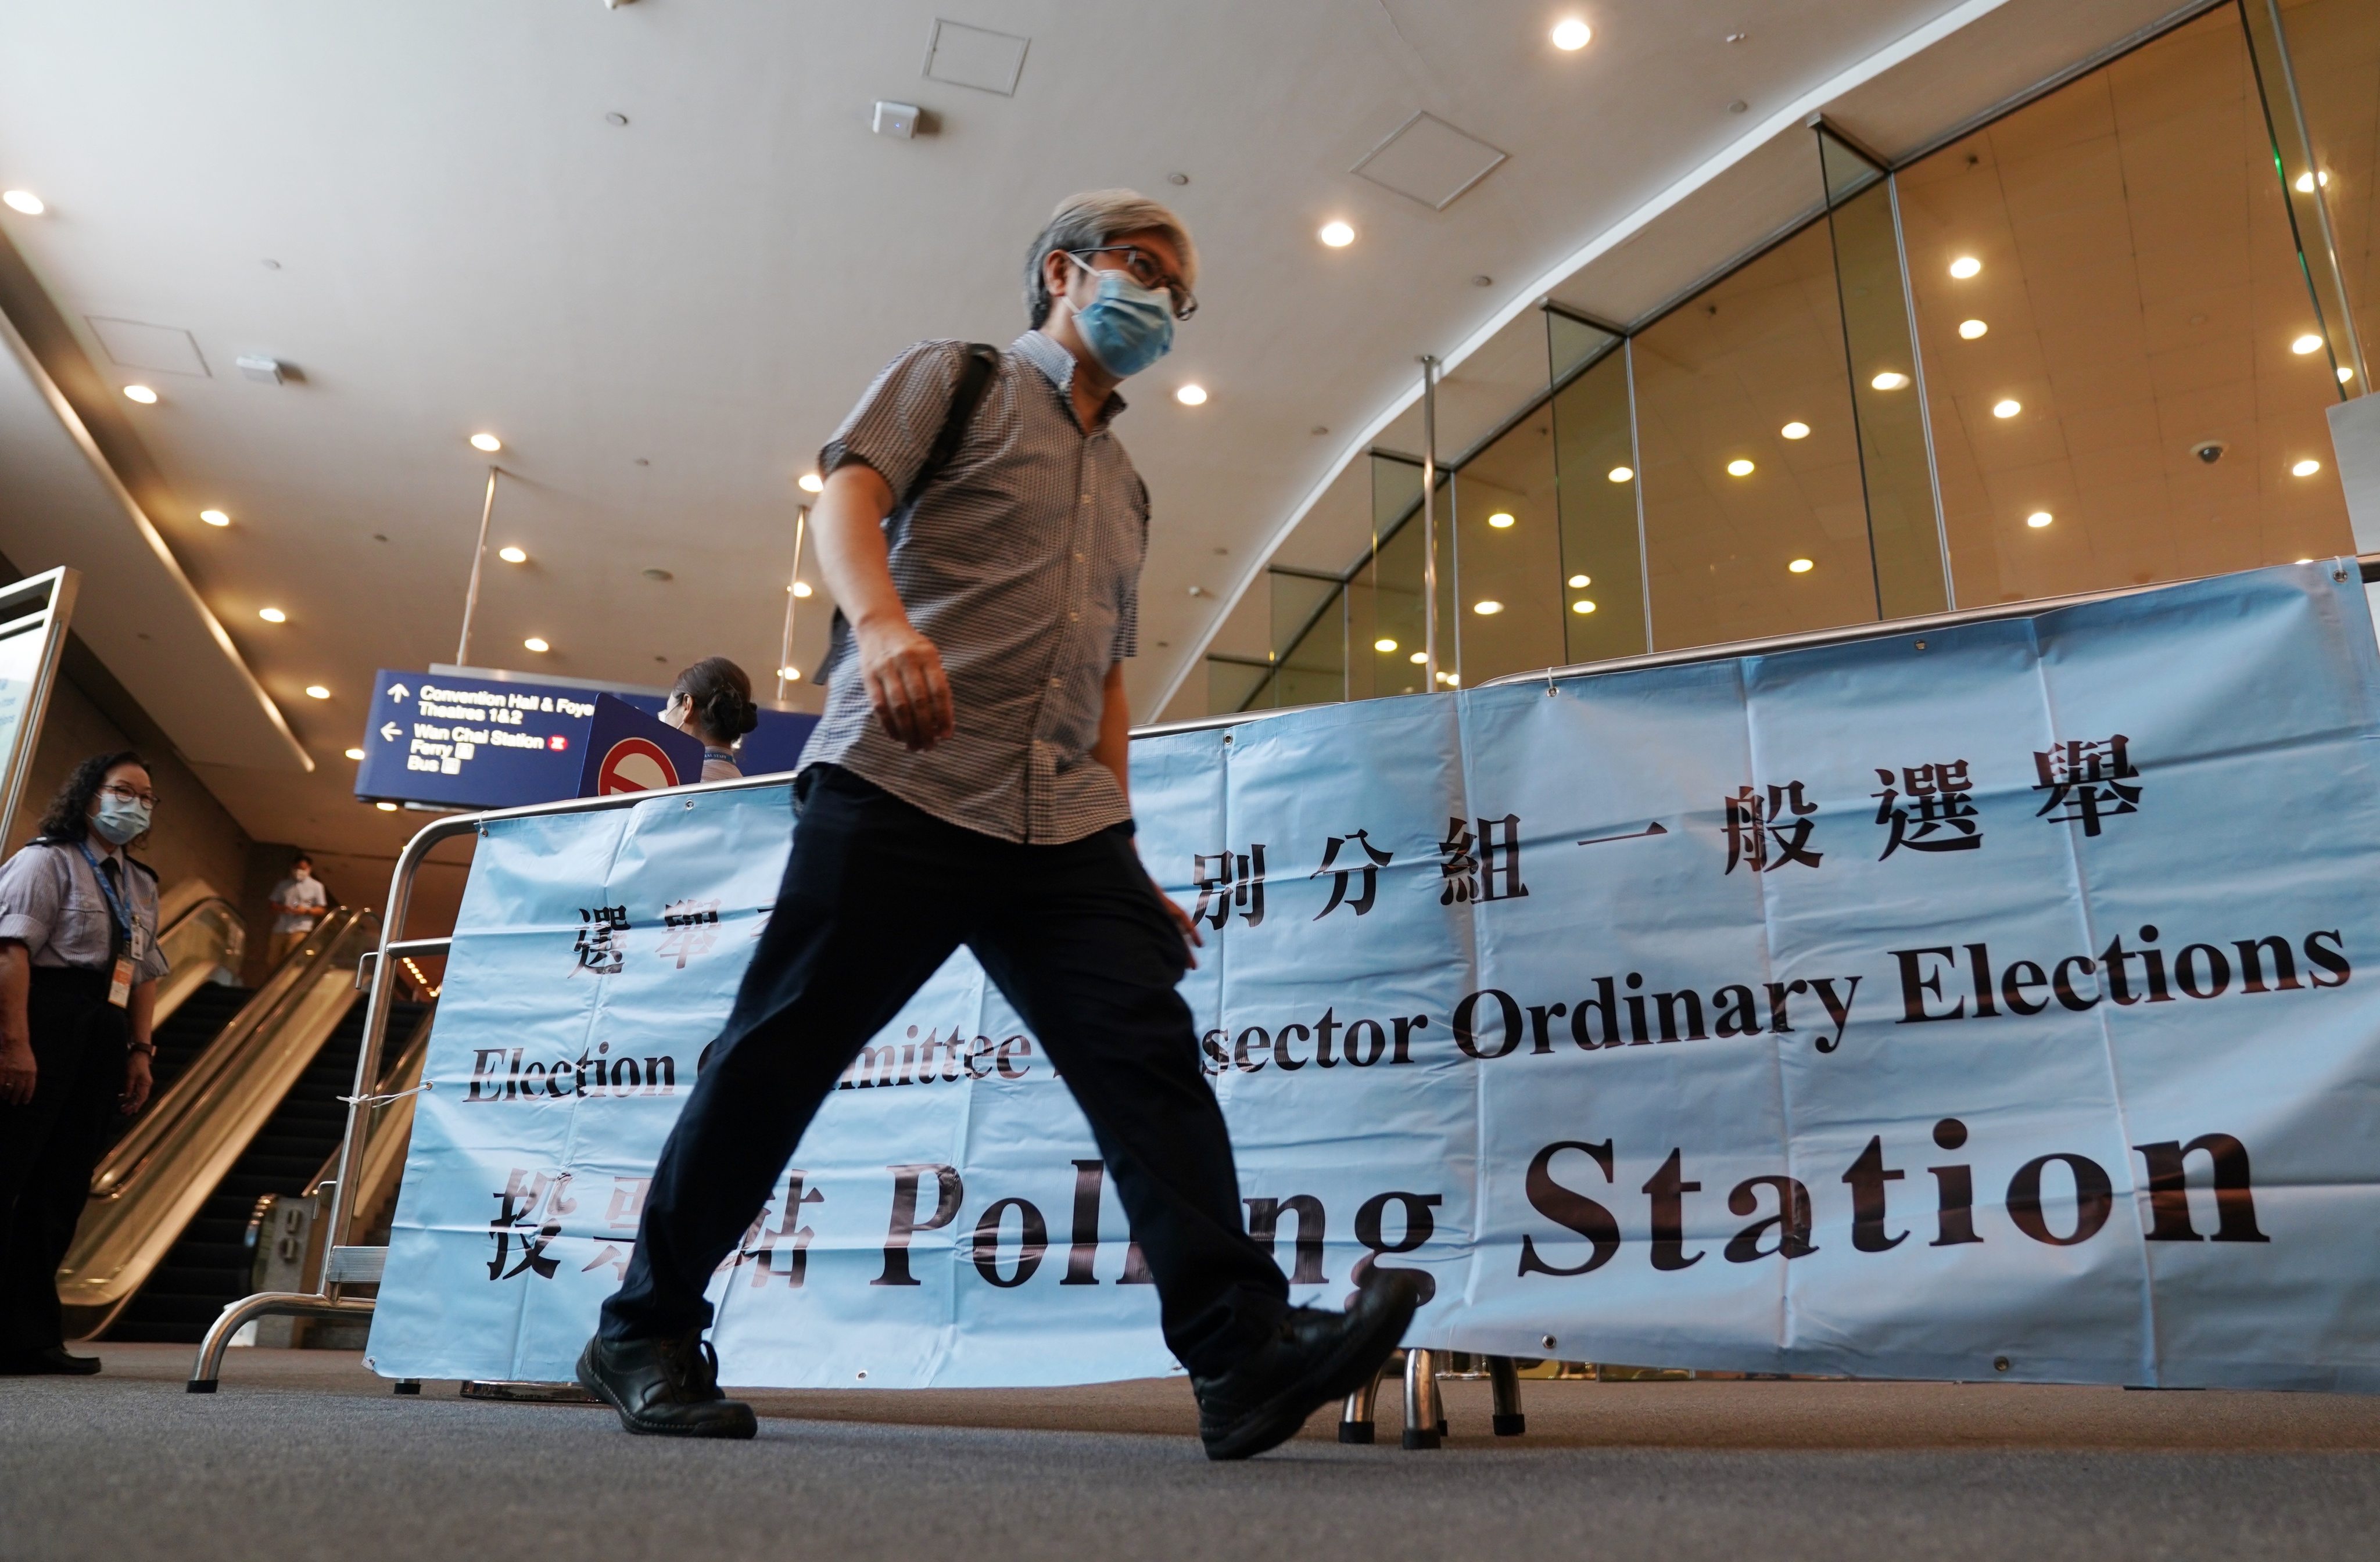 A citizen leaves after casting his ballot for the Election Committee polls, at the Hong Kong Convention and Exhibition Centre, in Wan Chai, on September 19. The turnout of about 90 per cent for the election, the first to be held after electoral reforms this year, signals voter confidence in the system. Photo: Xinhua